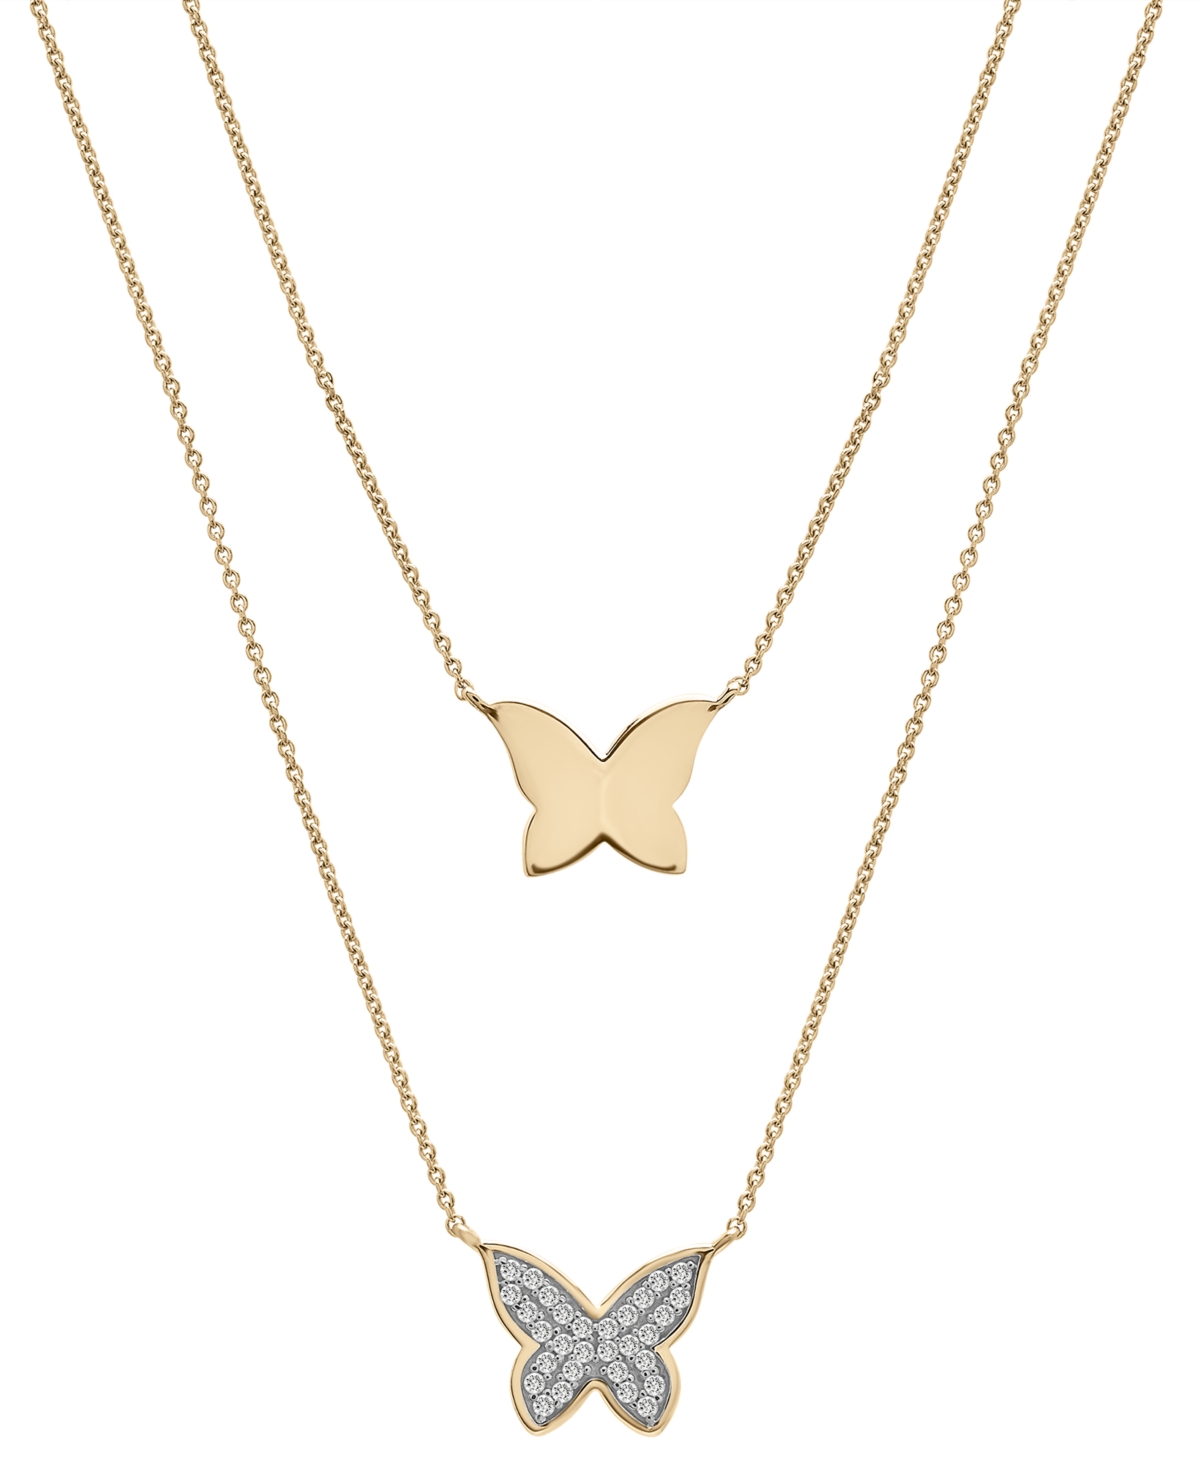 Diamond Pave & Polished Butterfly Layered Pendant Necklace (1/6 ct. t.w.) in 10k Gold, 17" + 1" extender, Created for Macy's - Yellow Gold